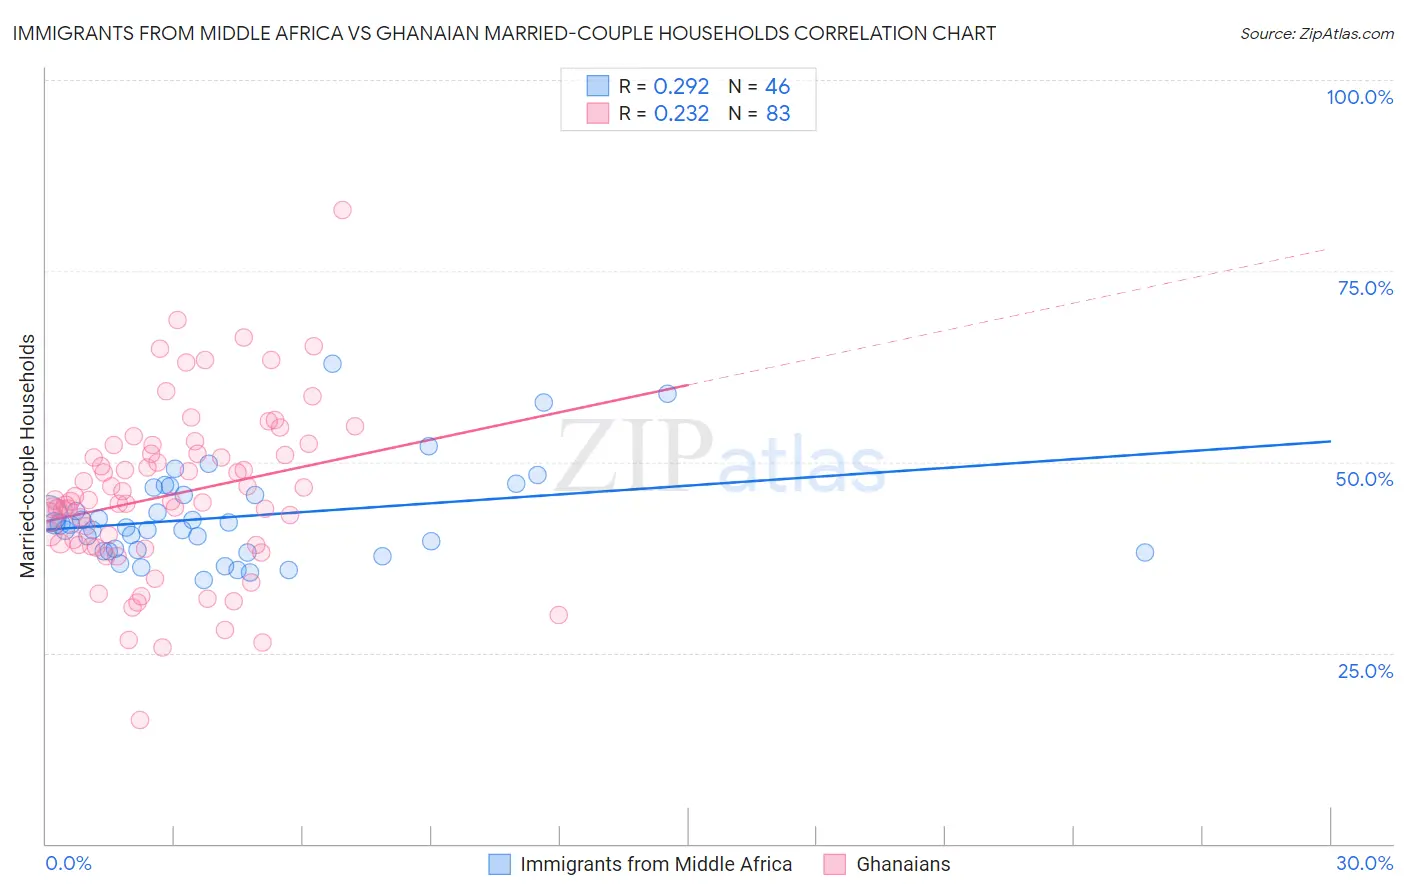 Immigrants from Middle Africa vs Ghanaian Married-couple Households